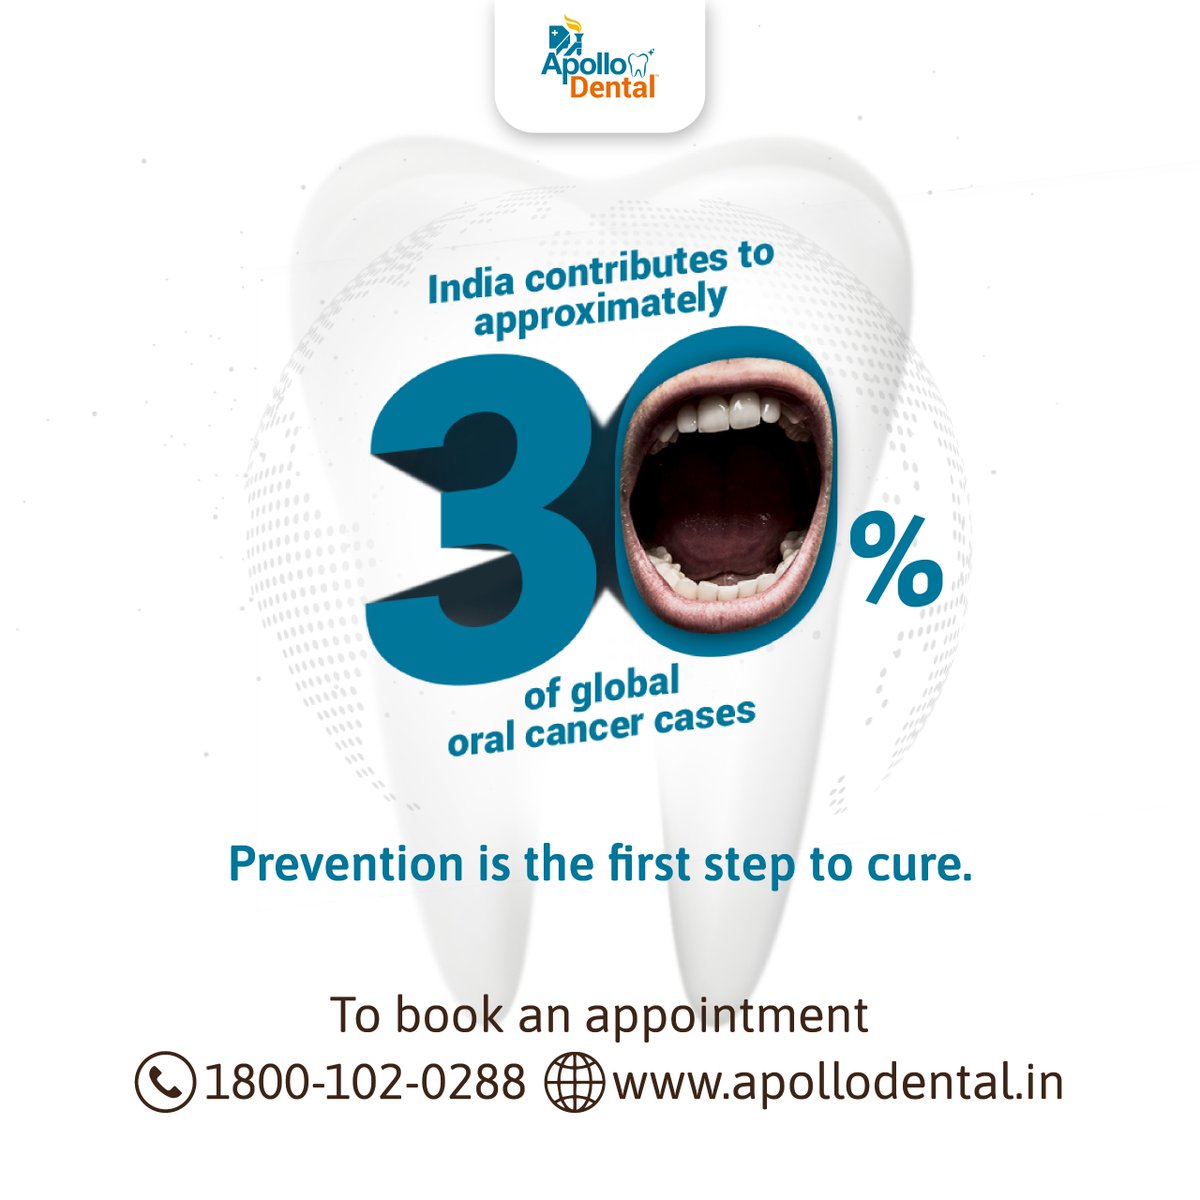 Oral cancer is more common in men as compared to women. It is emerging as a major public health problem in India.
Regular checkups can help prevent oral cancer. To book an appointment, call us at 1800-102-0288.

#OralCancerAwareness #PreventionIsKey #TobaccoAlcoholDiet